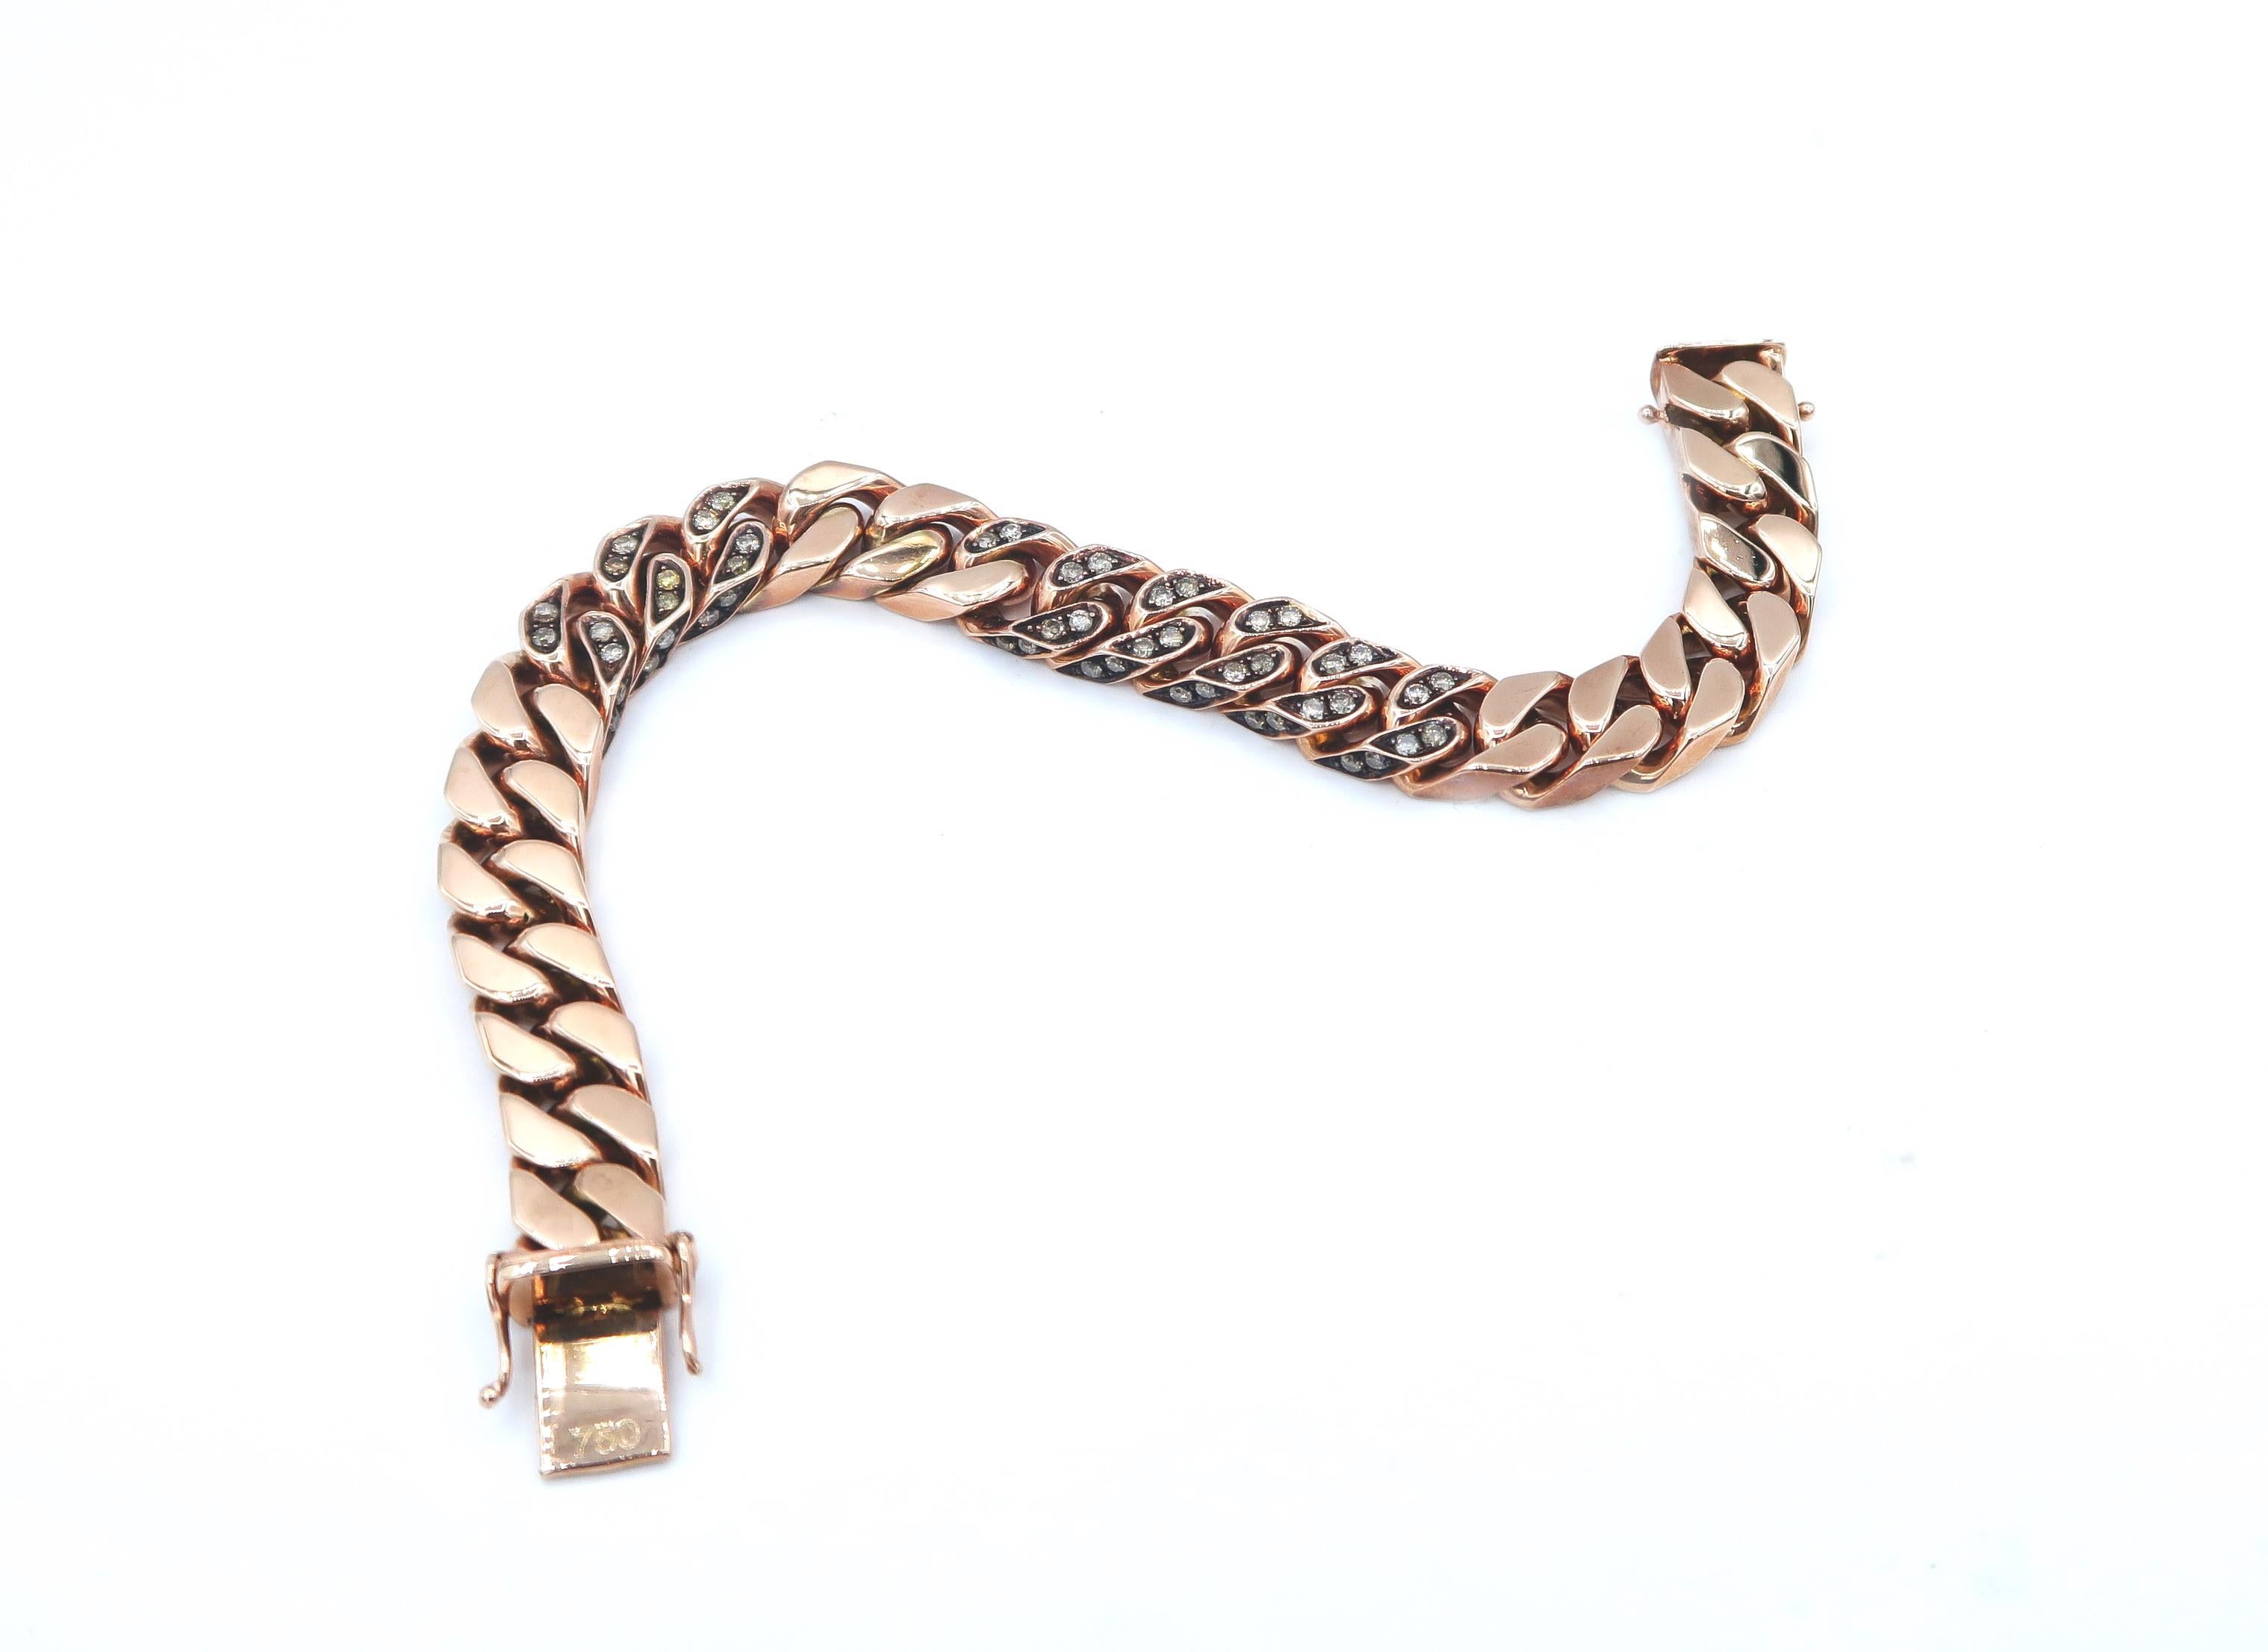 Brown Champagne Diamond Chain Link 18K Rose Gold Bracelet

Length: 6 inches

Gold: 18K Rose Gold 43.733 g
Brown Diamond: 2.19 ct